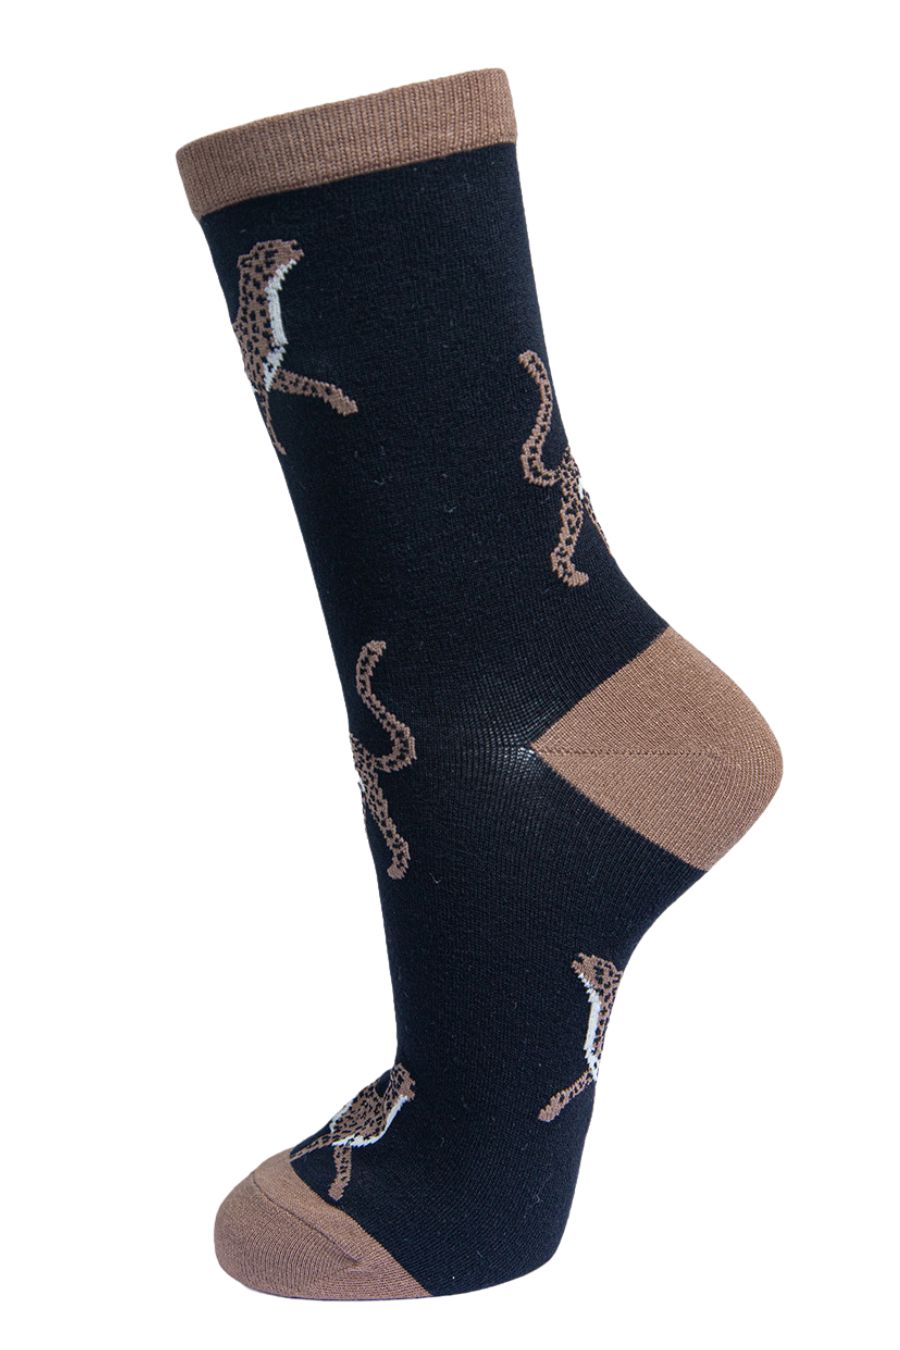 black bamboo ankle socks with brown cheetahs on them